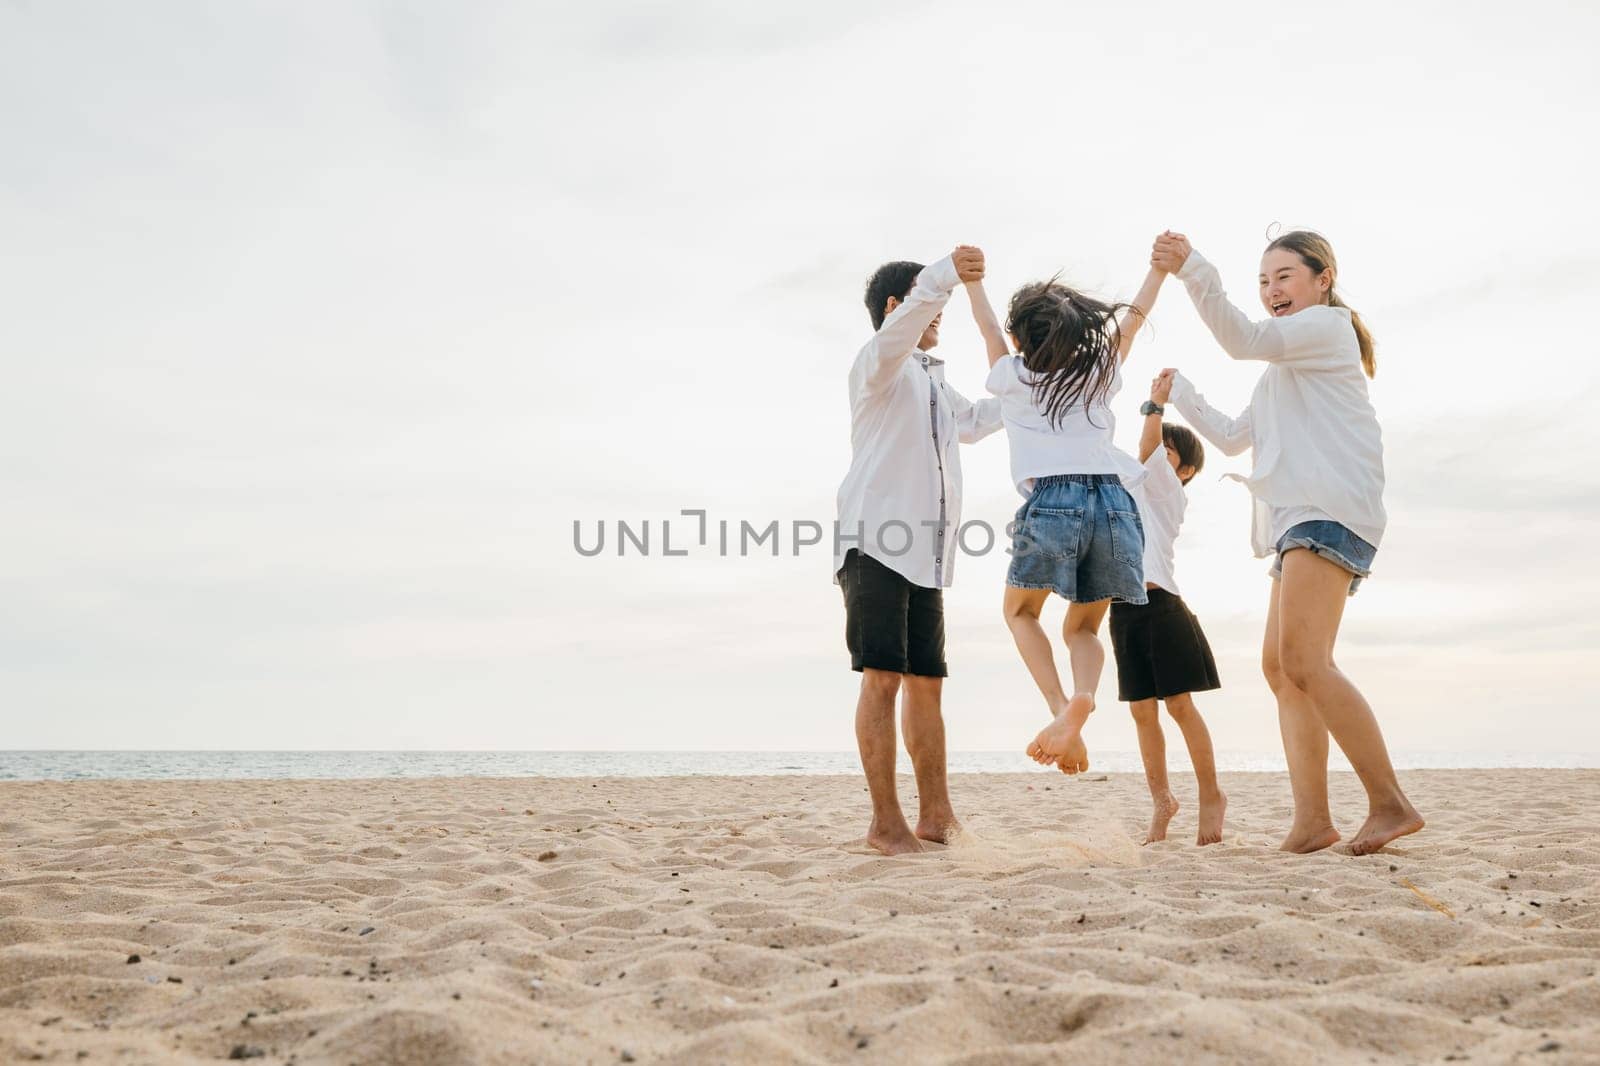 A burst of joy on beach as an Asian family father and mother holding children leaps into air. beautiful ocean provides serene setting for this delightful portrayal of family togetherness. by Sorapop